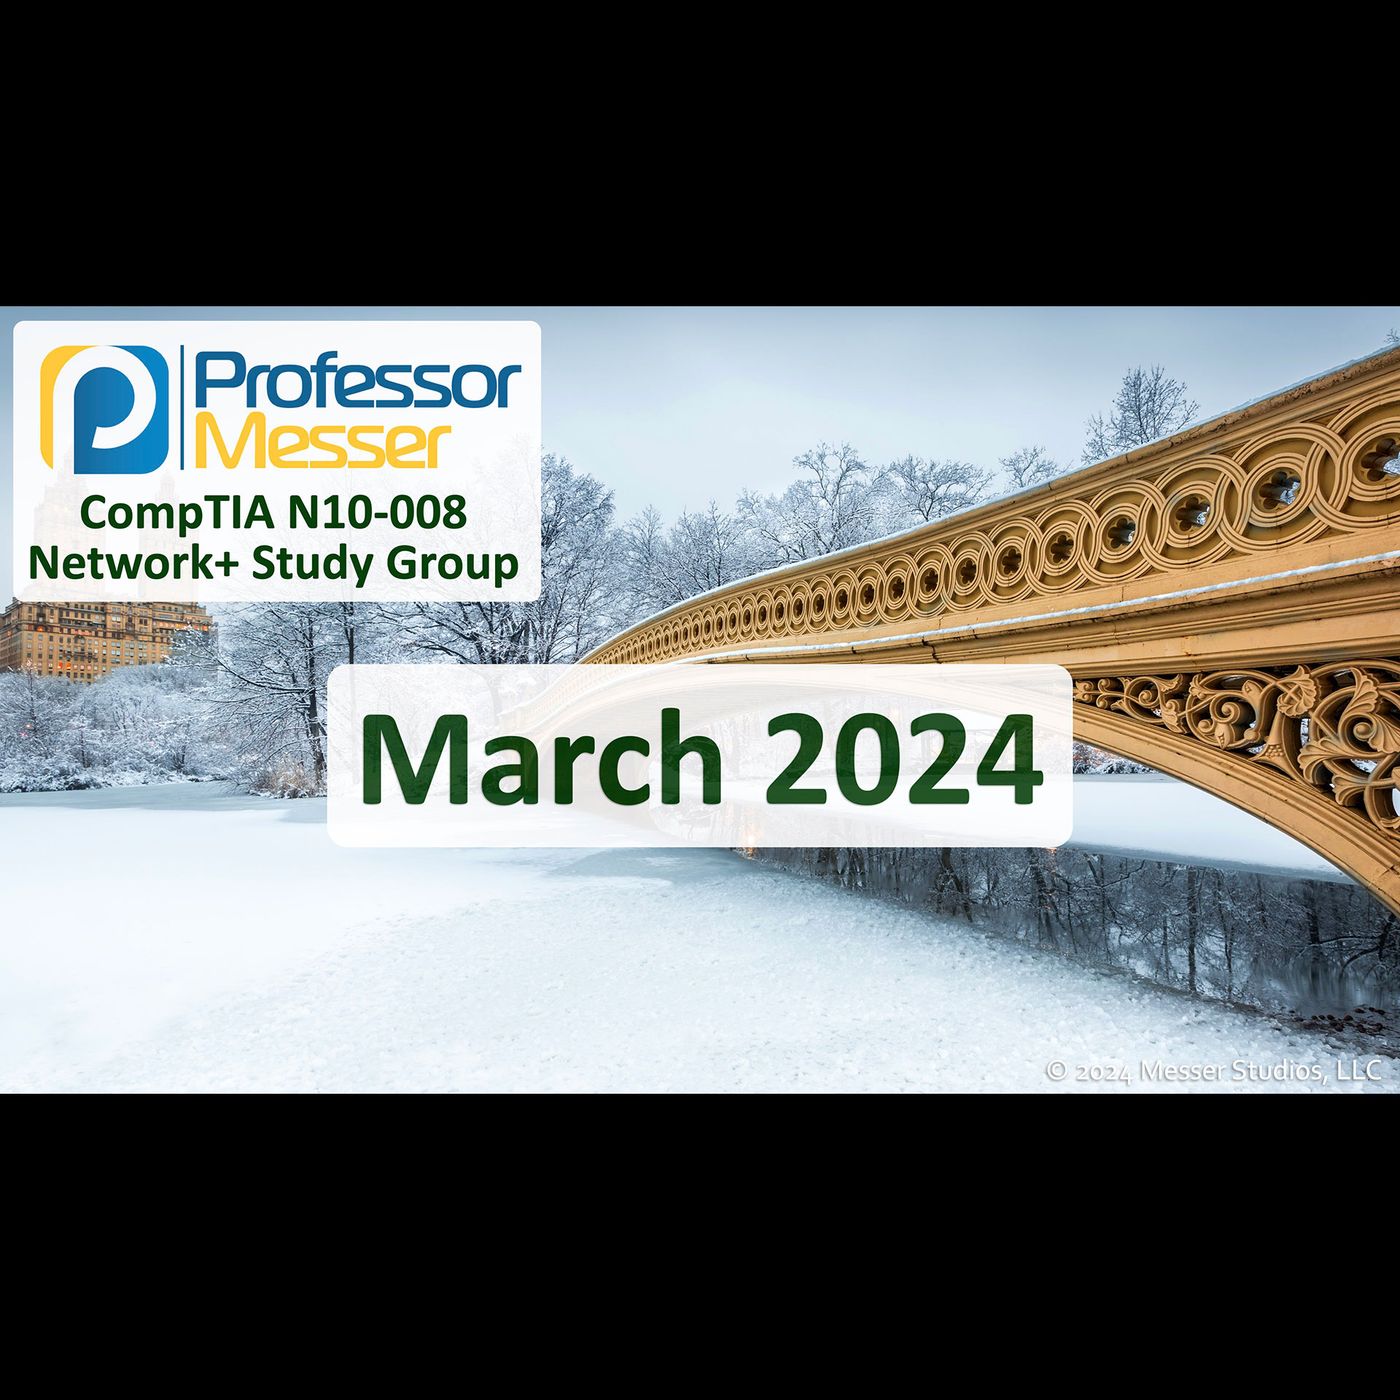 Professor Messer's N10-008 Network+ Study Group - March 2024